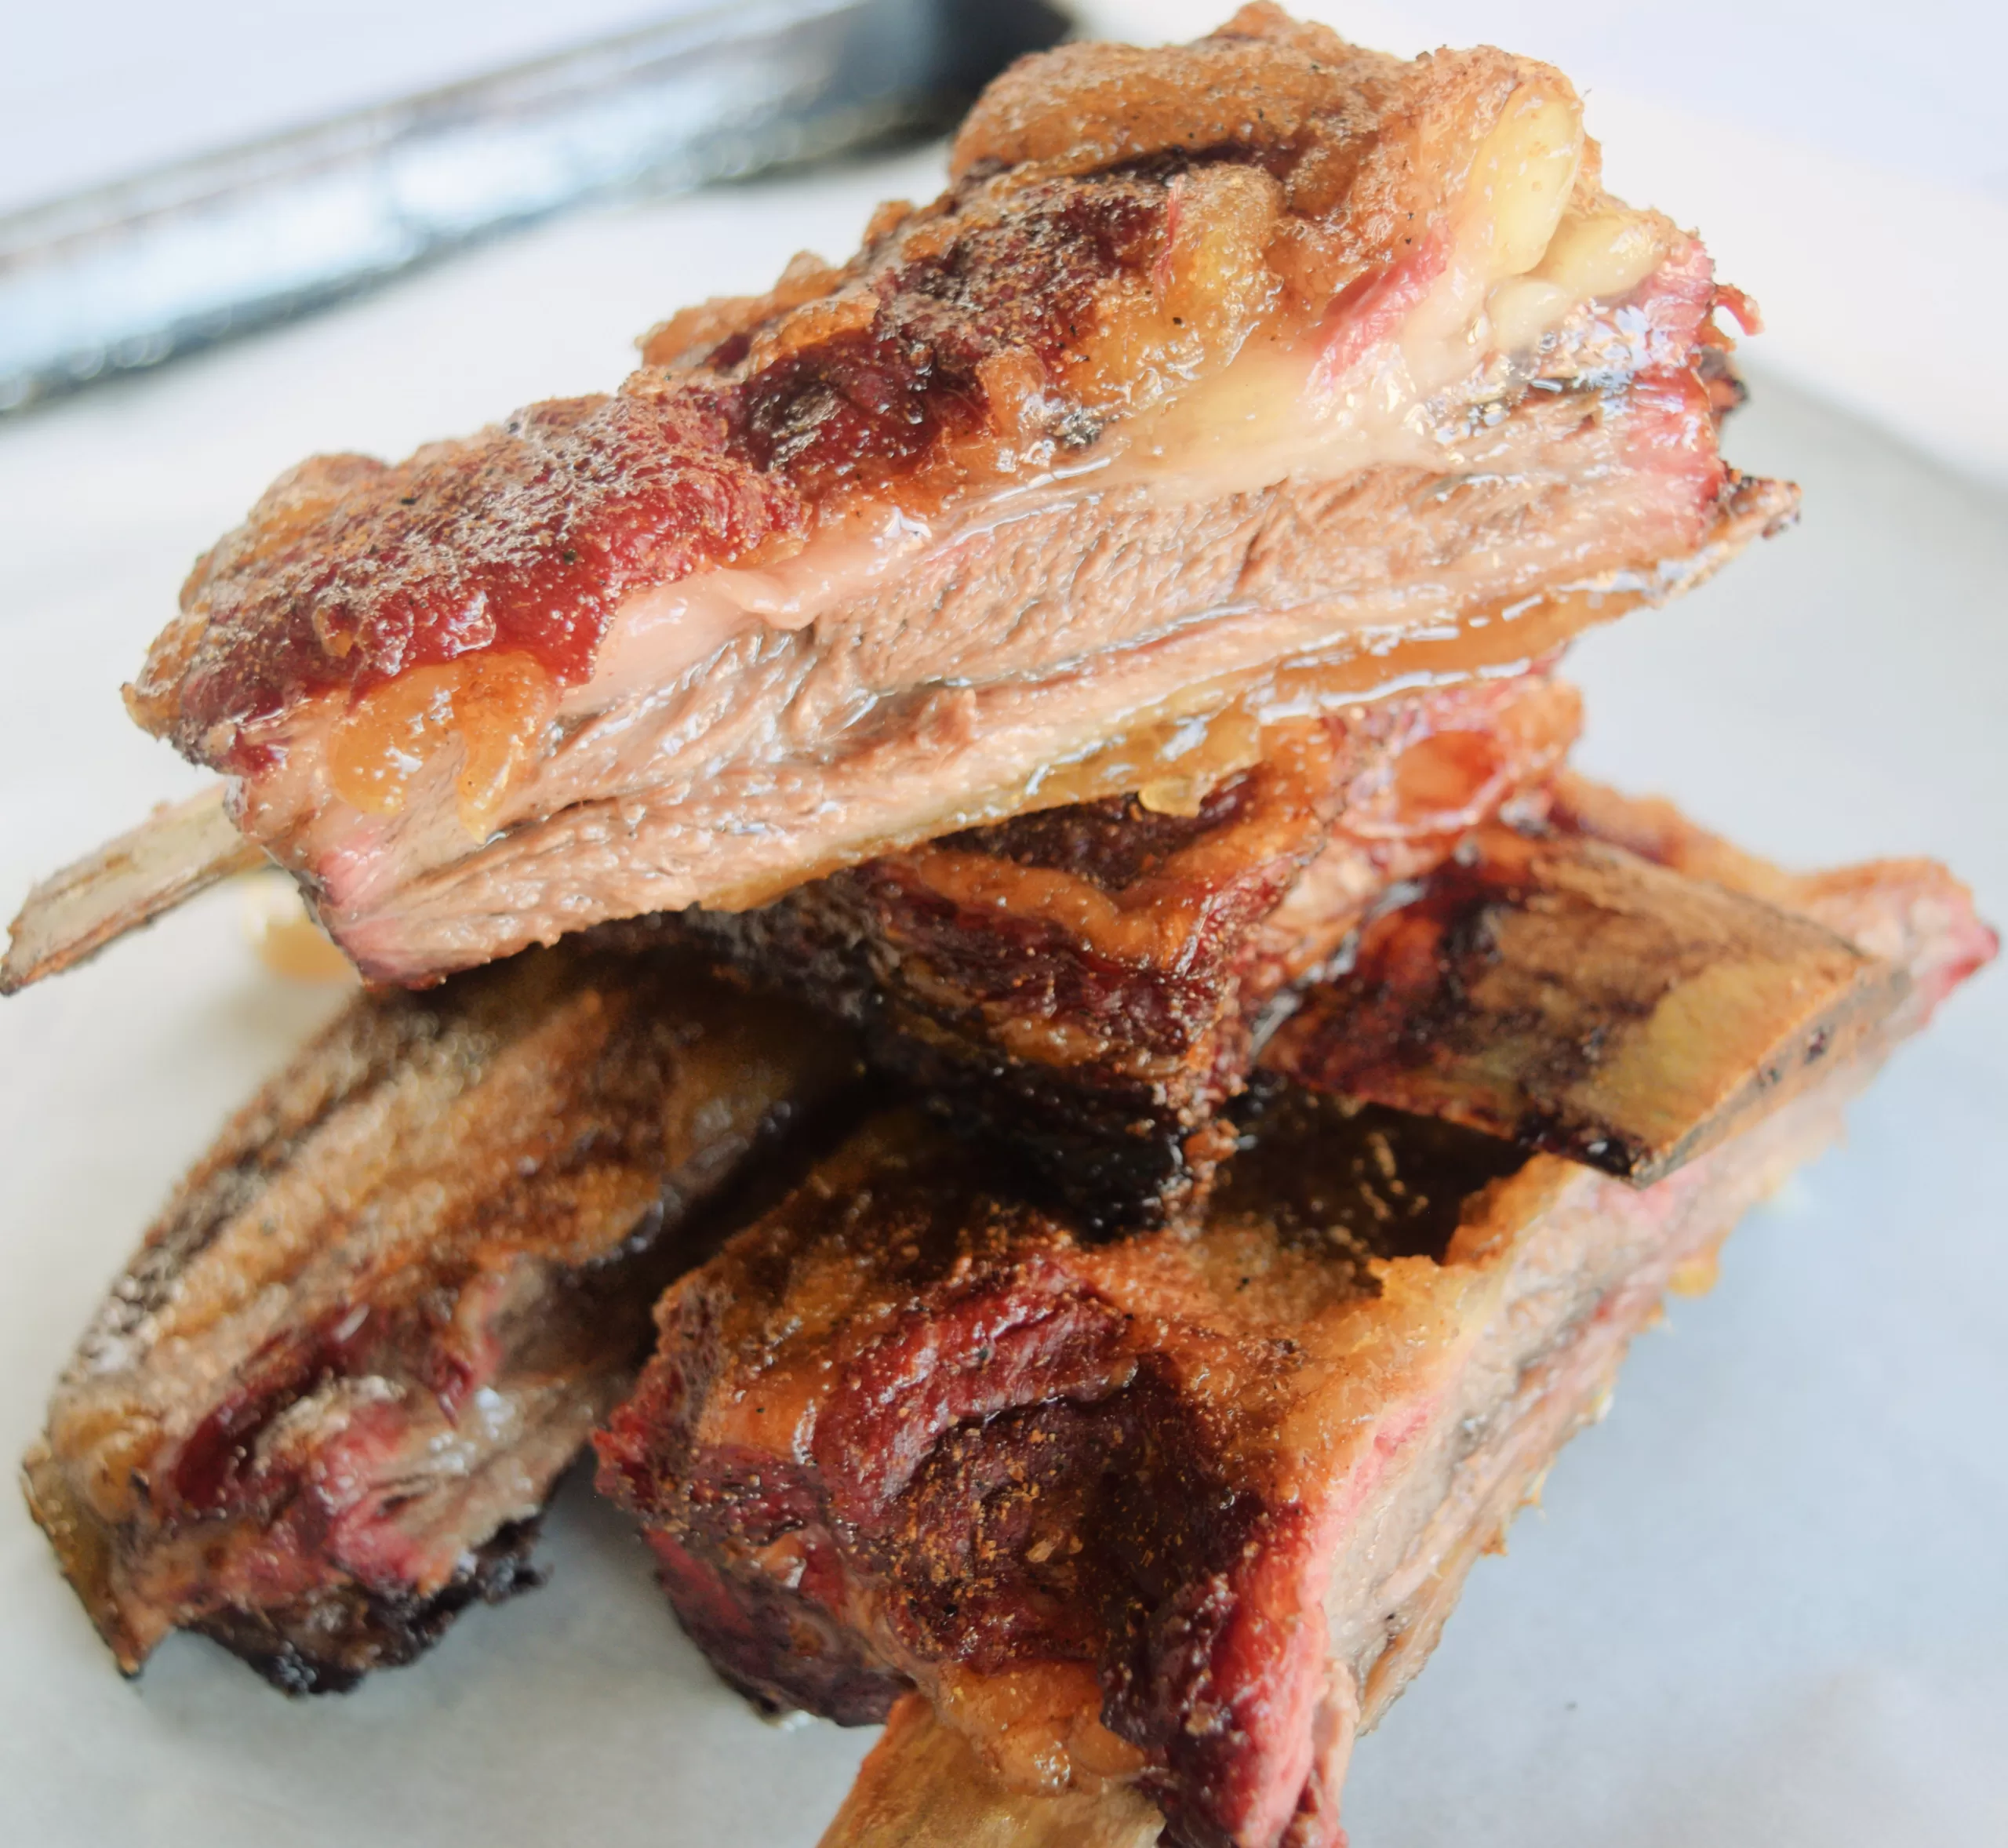 Smoked ribs for The Best Easy Slow Smoked Beef Back Ribs Recipe.